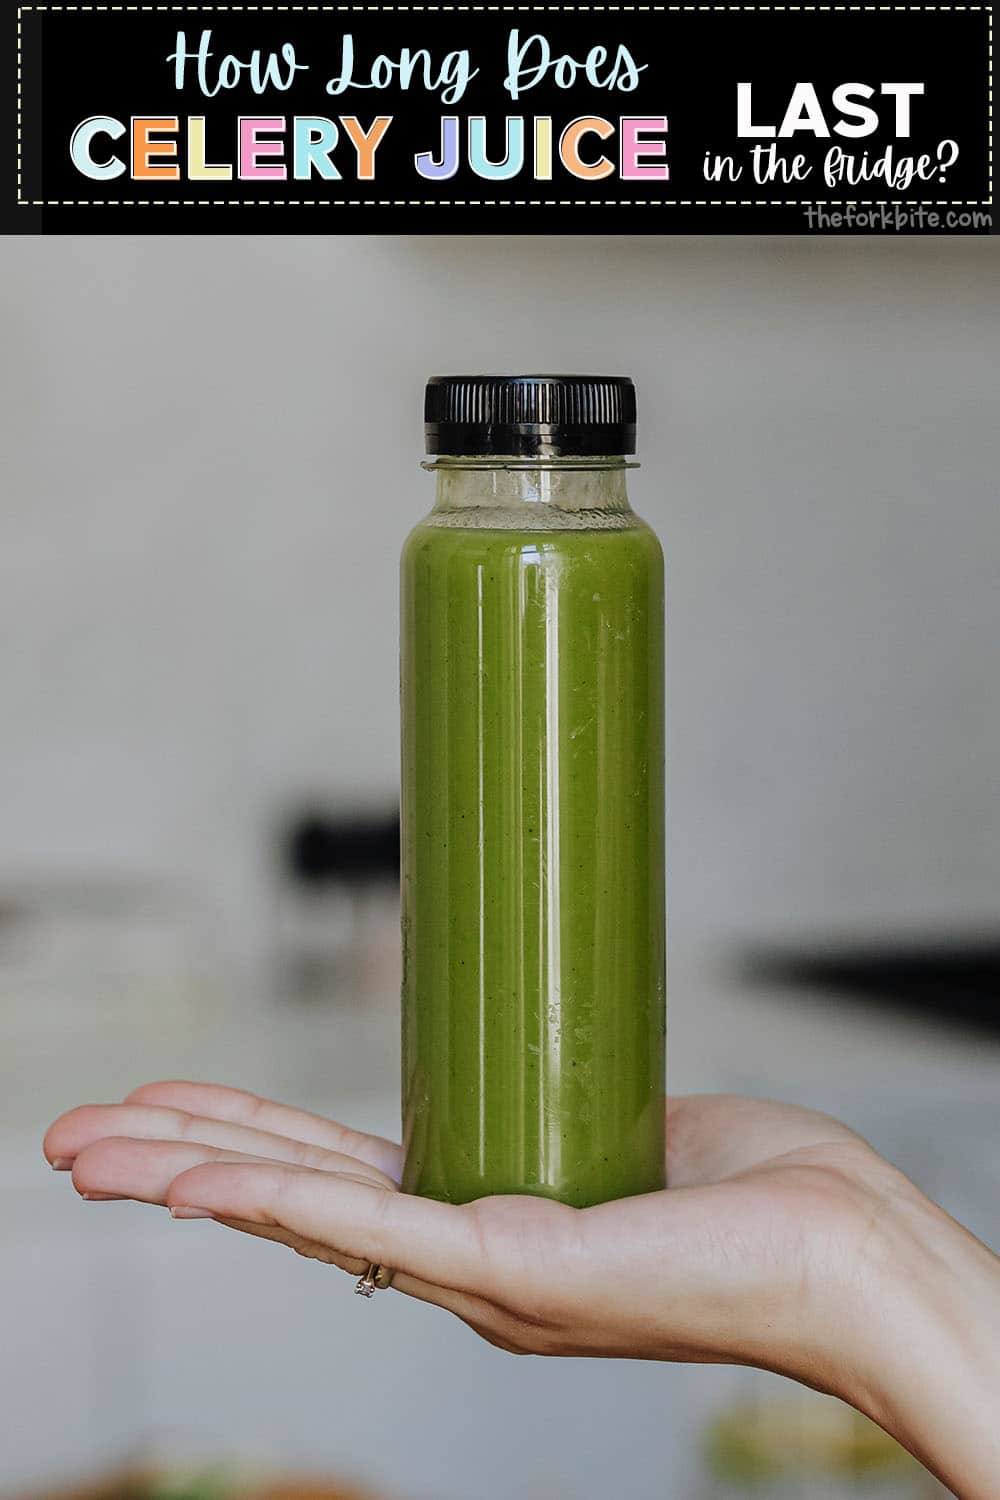 You can keep homemade juice in your fridge for anywhere between 24 and 72 hours maximum. However, if you would like to enjoy it at its most beneficial, I recommend drinking it within 20 minutes.